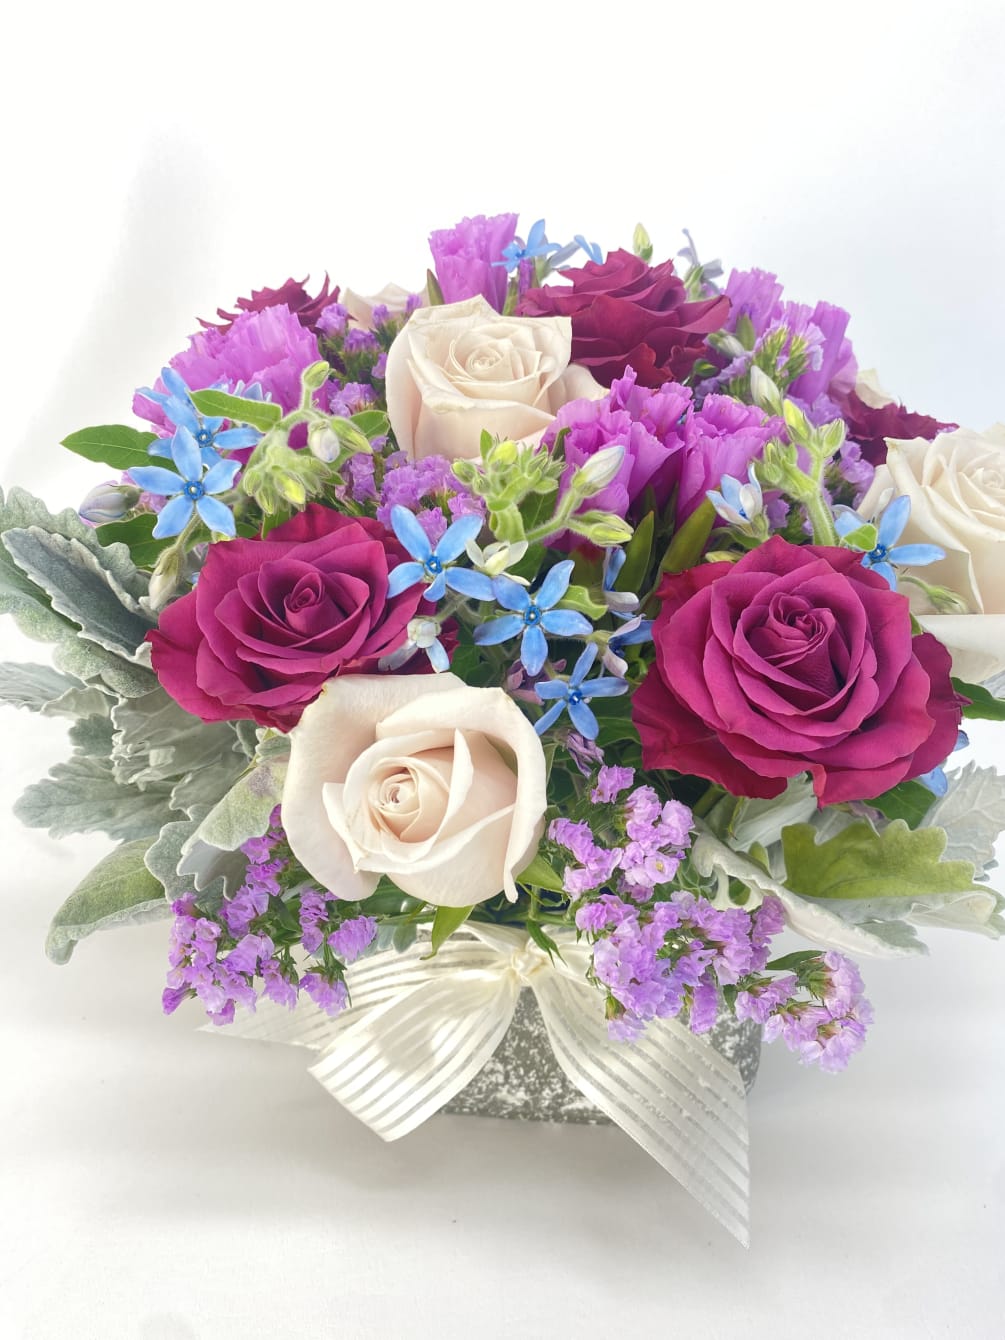 Colorful and sophisticated floral arrangement in a nice concert vase.